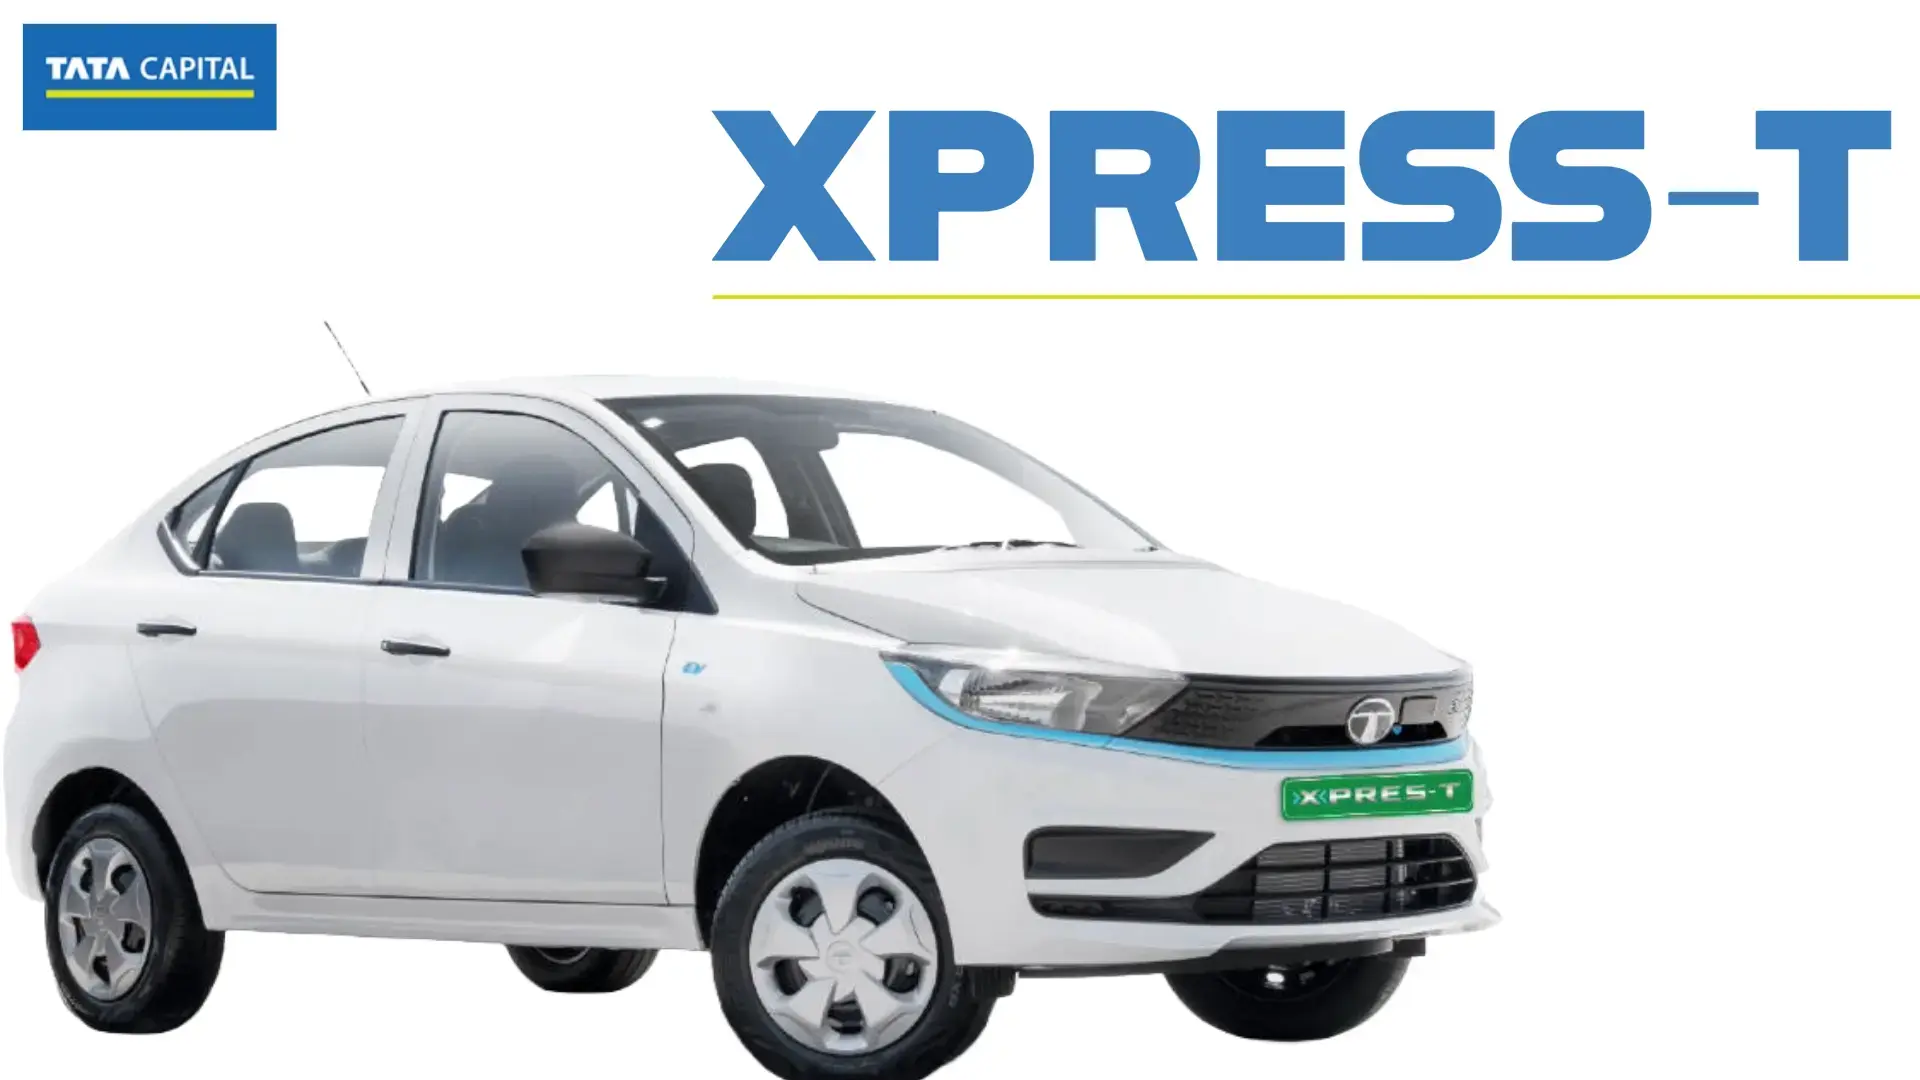 Tata Xpress-T EV: A Leap Towards Sustainable Mobility